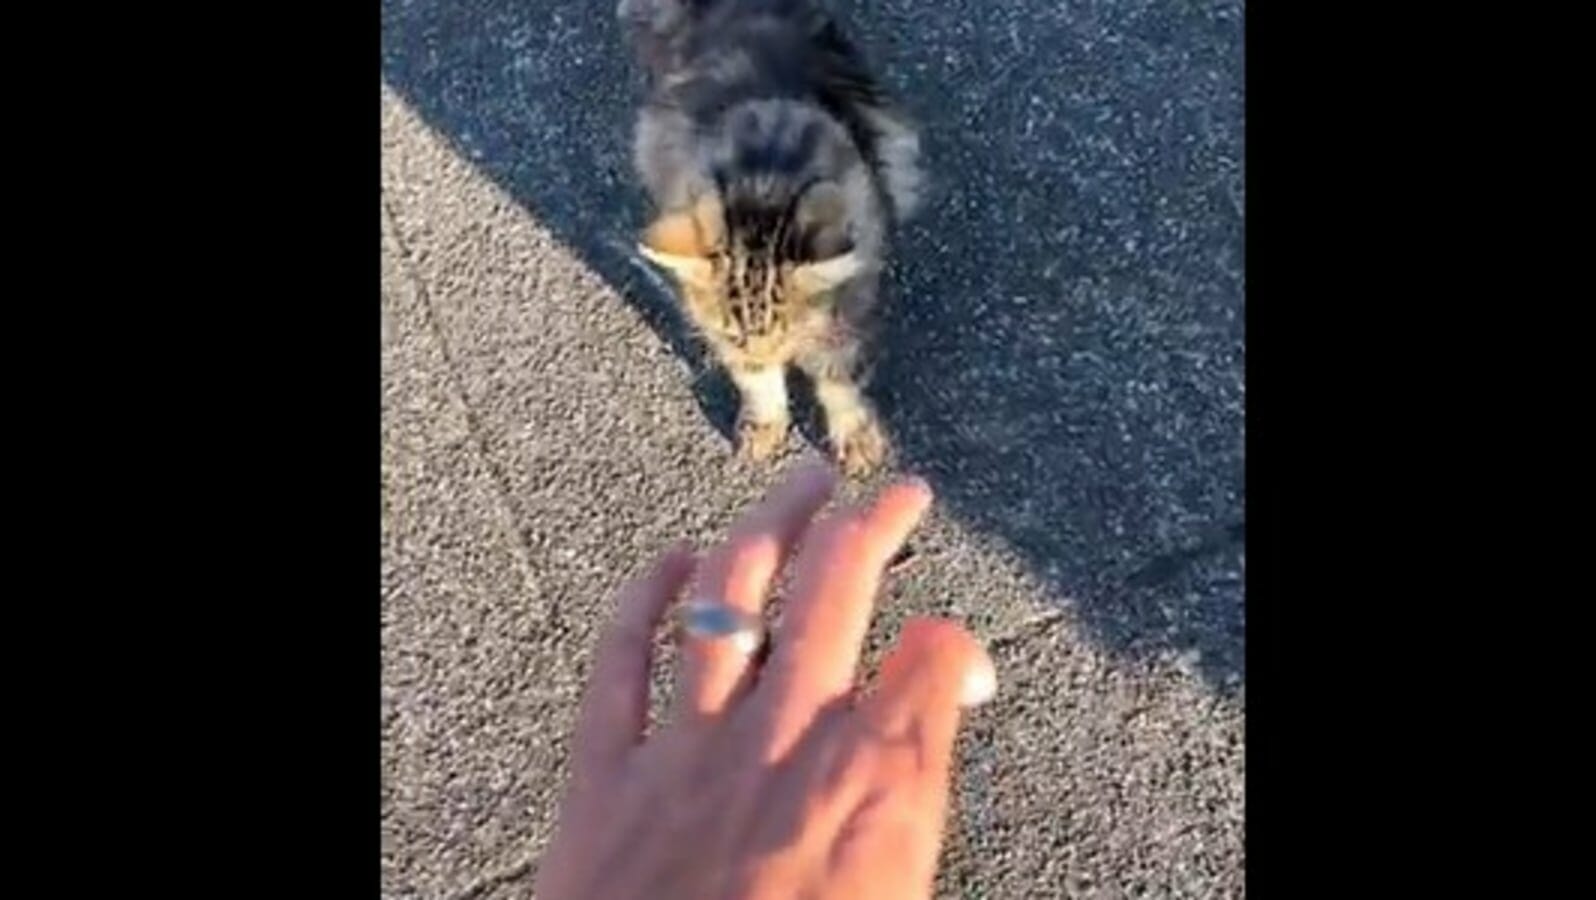 Man goes around telling cats he got married, captures their reactions